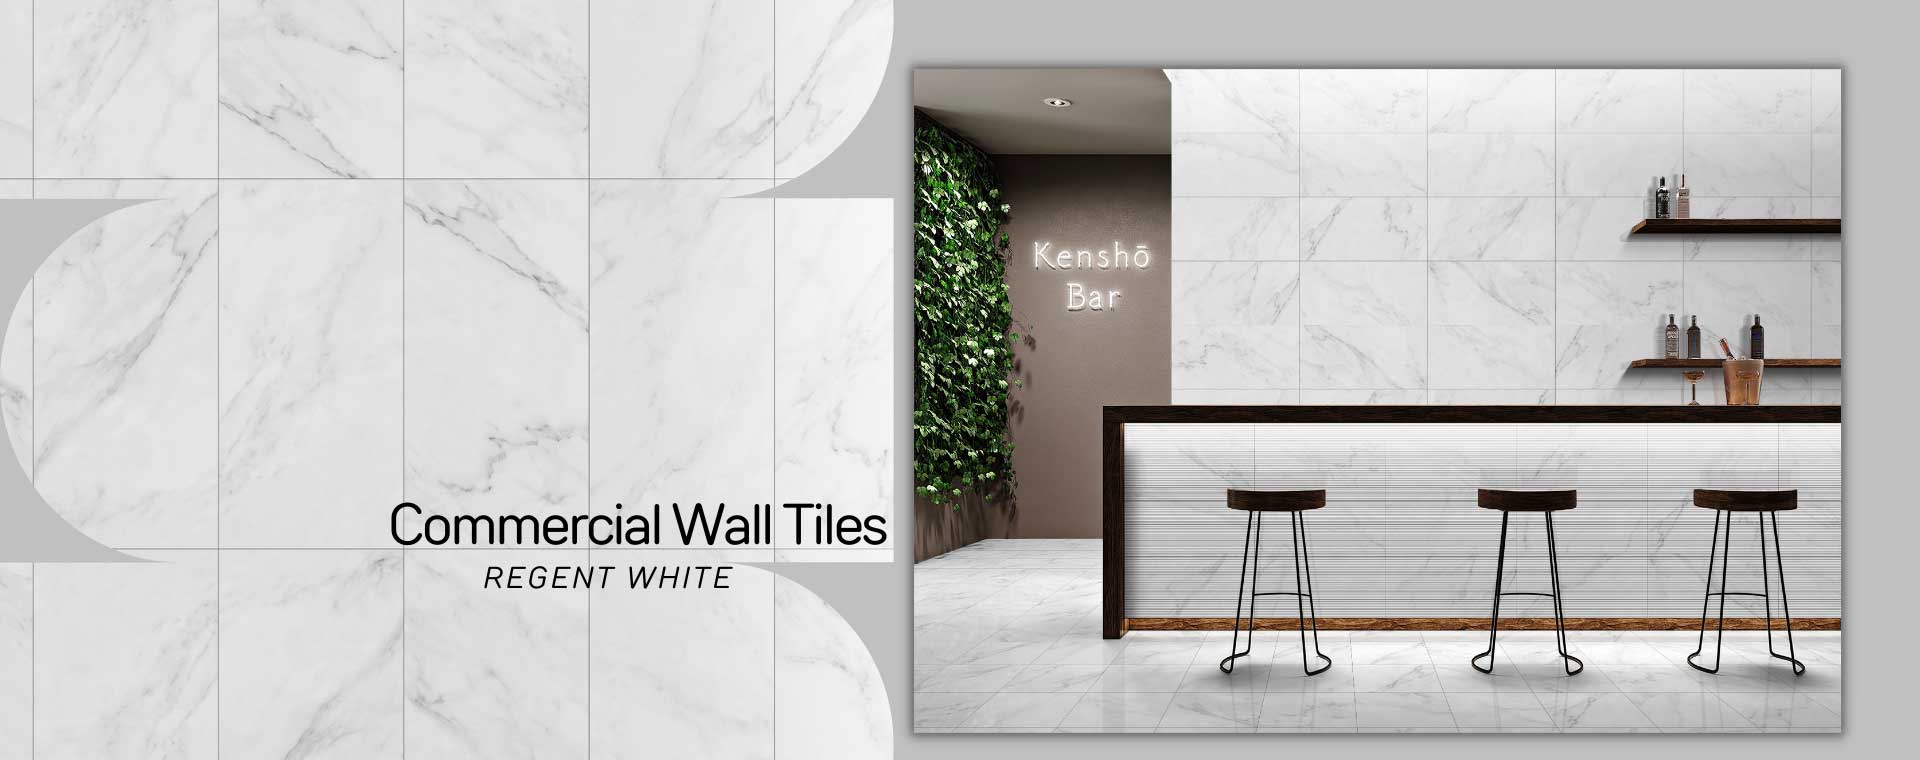 Commercial Wall Tiles